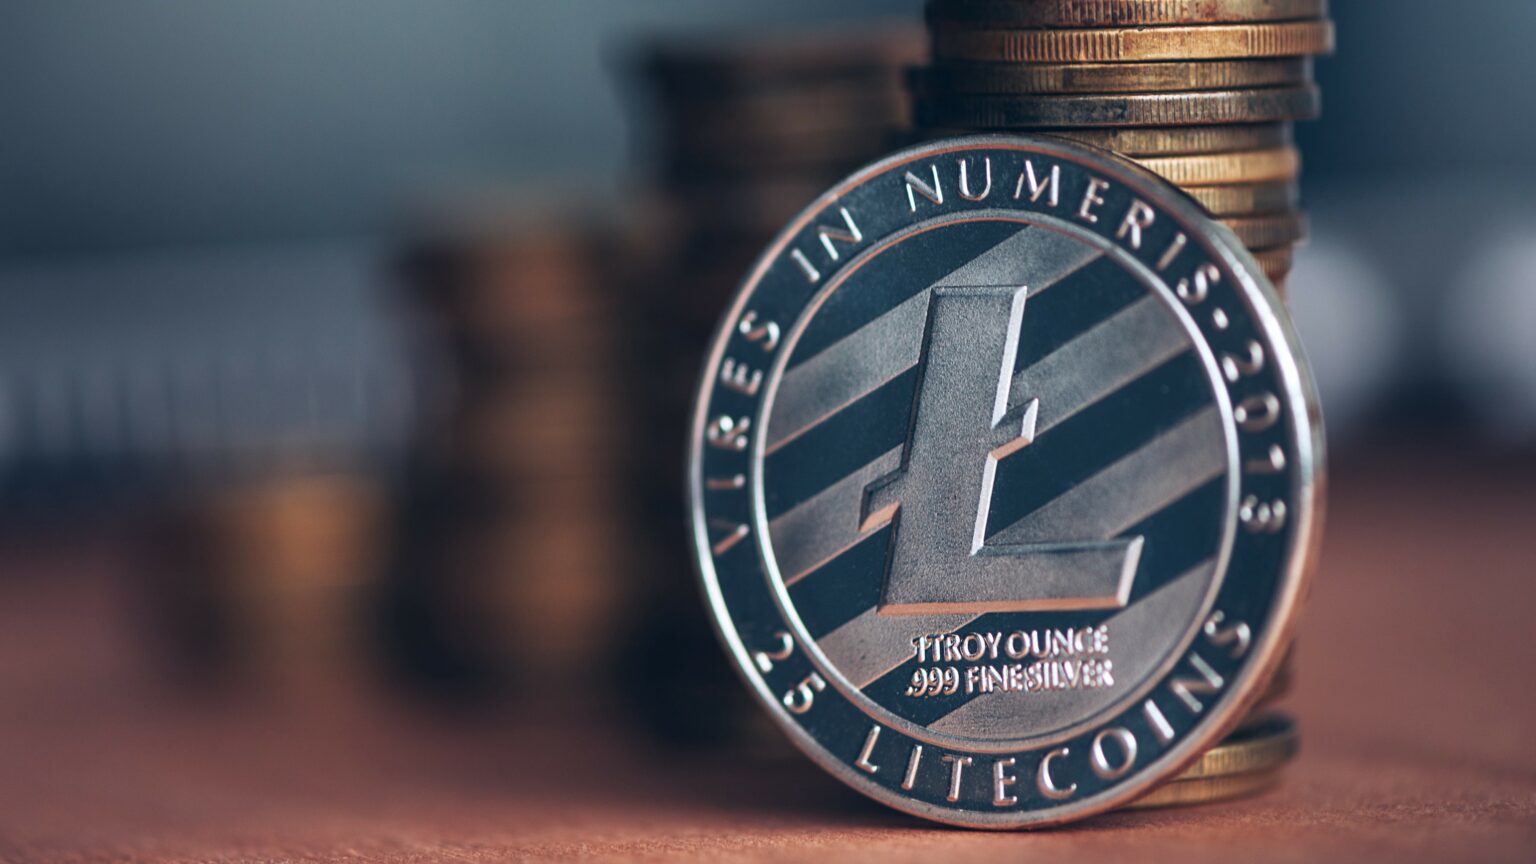 Top 10 best cryptocurrencies to invest in 2021 - #1 Tech